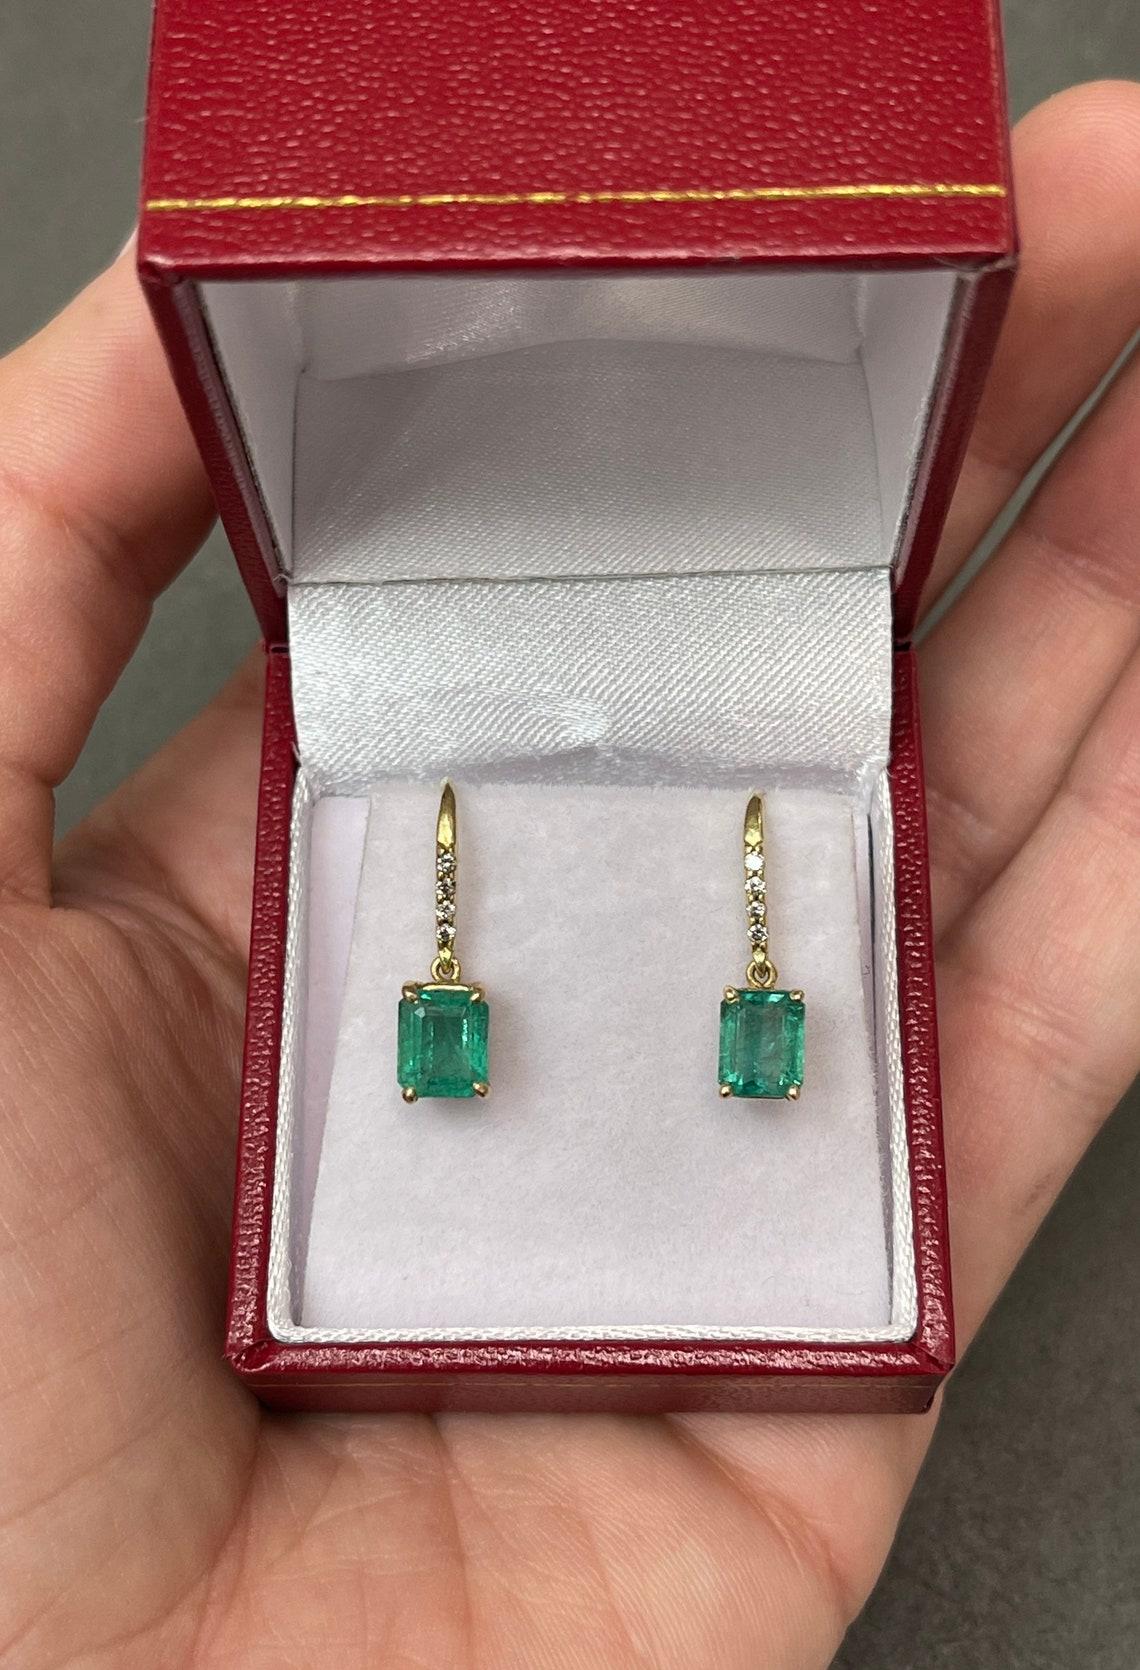 A stylish pair of emerald cut-emerald & diamond hook earrings made in 18K yellow gold. The chic pair of earrings feature green, natural emeralds. The emeralds have beautiful eye clarity and are simply vivacious! The gems display minor flaws that are